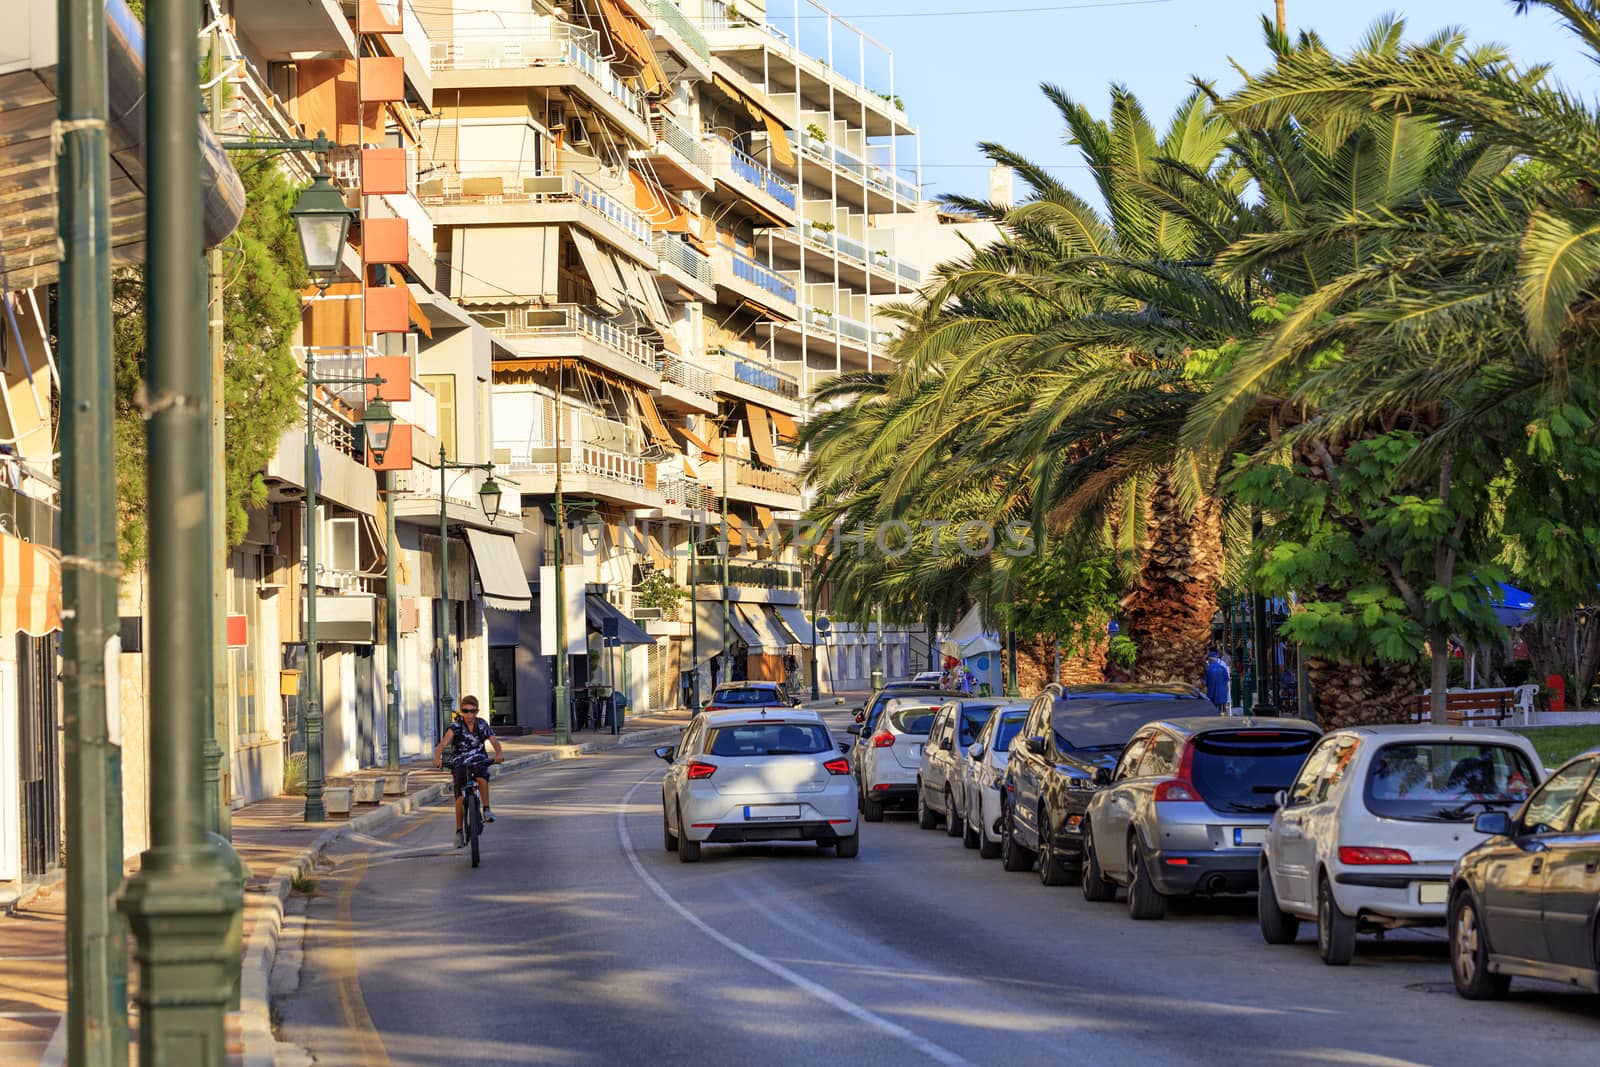 The asphalt road of the street of Loutraki city, which is flooded with sunlight and a teenager rides a bicycle on the road, the sky is reflected in blue light on the roofs of passing cars in the shade of spreading palm trees.